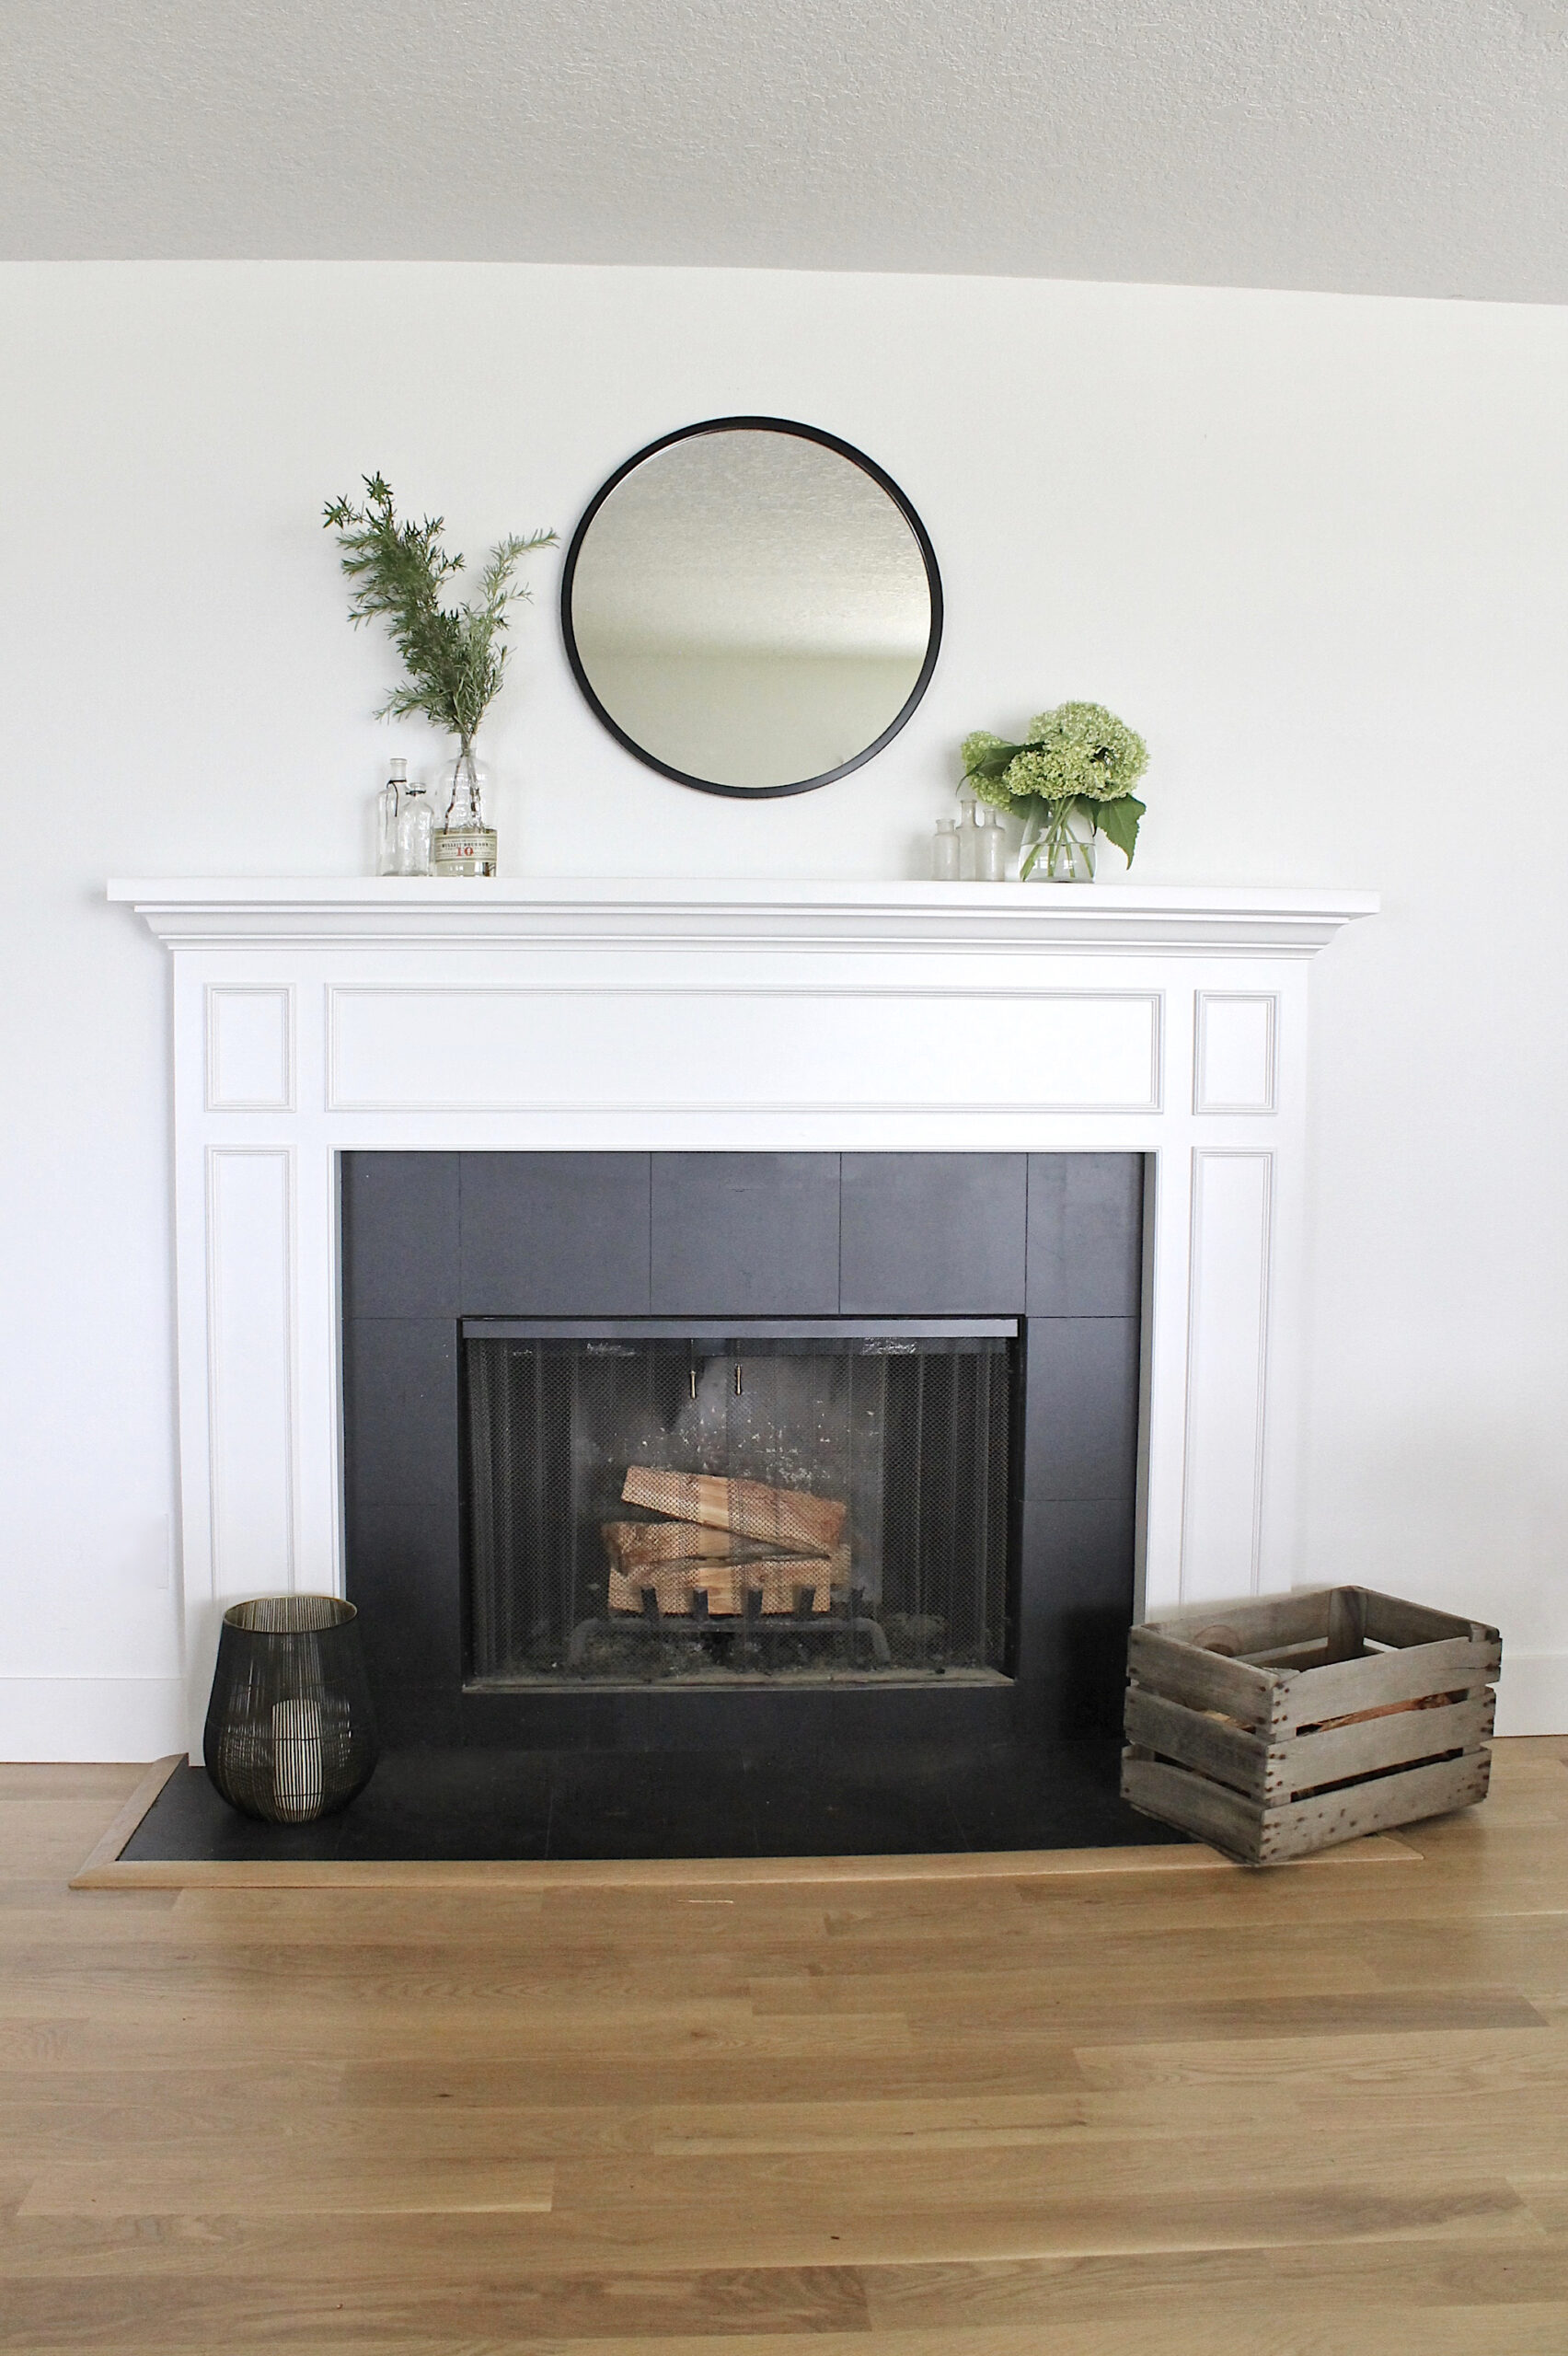 How To Paint A Ceramic Tile Fireplace, How To Remove And Replace Fireplace Tile